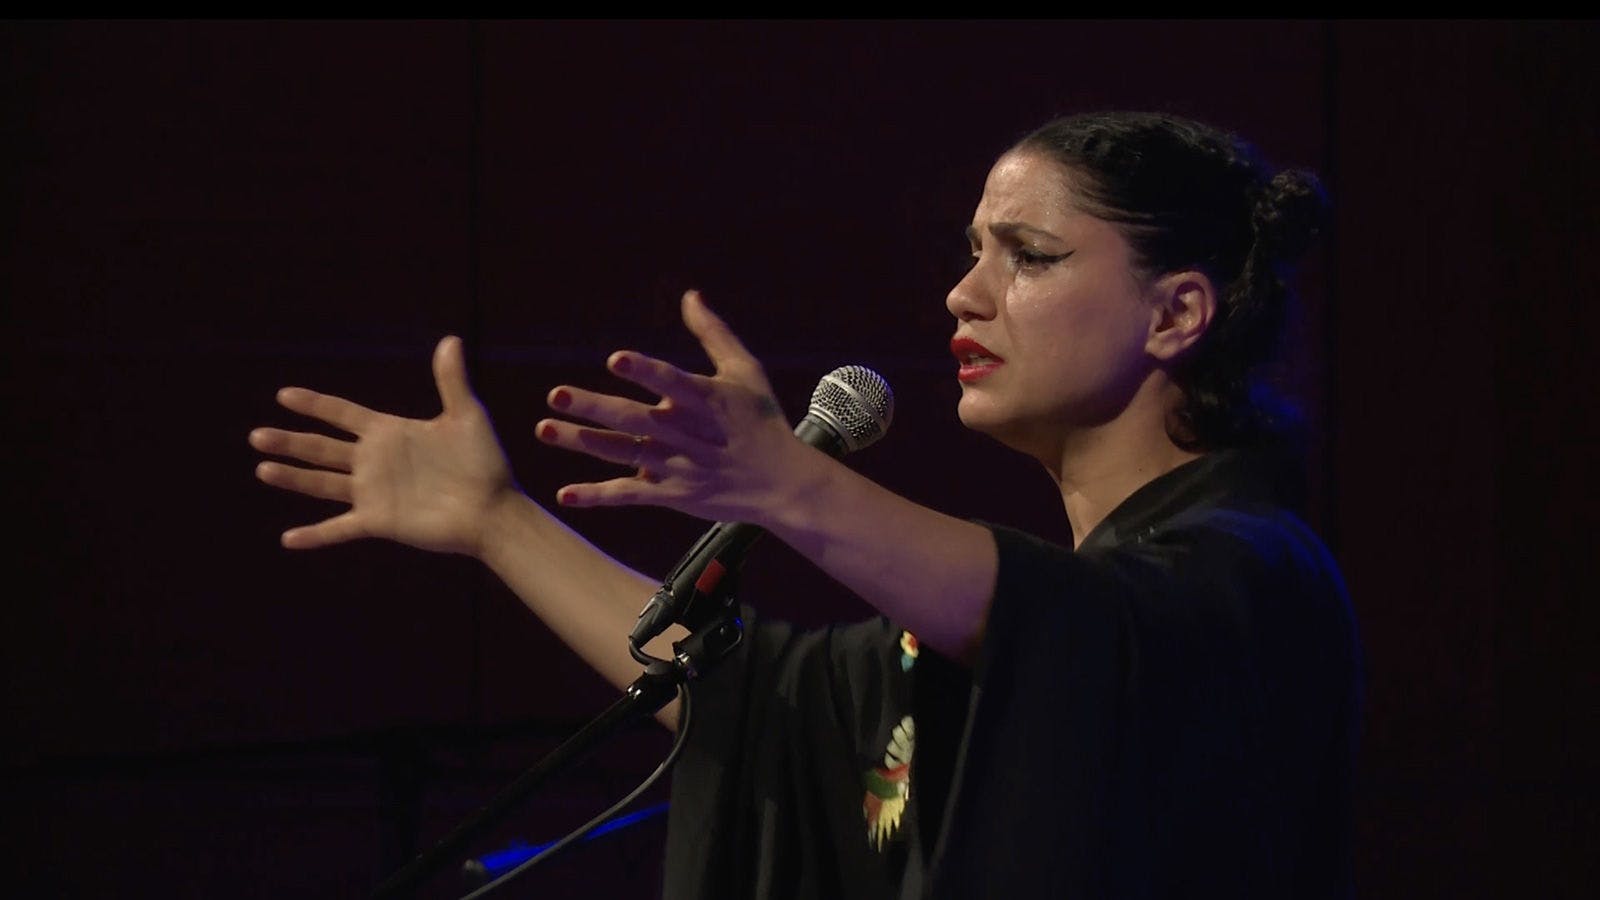 Emel Mathlouthi in performance, standing in front of a microphone with arms outstretched.